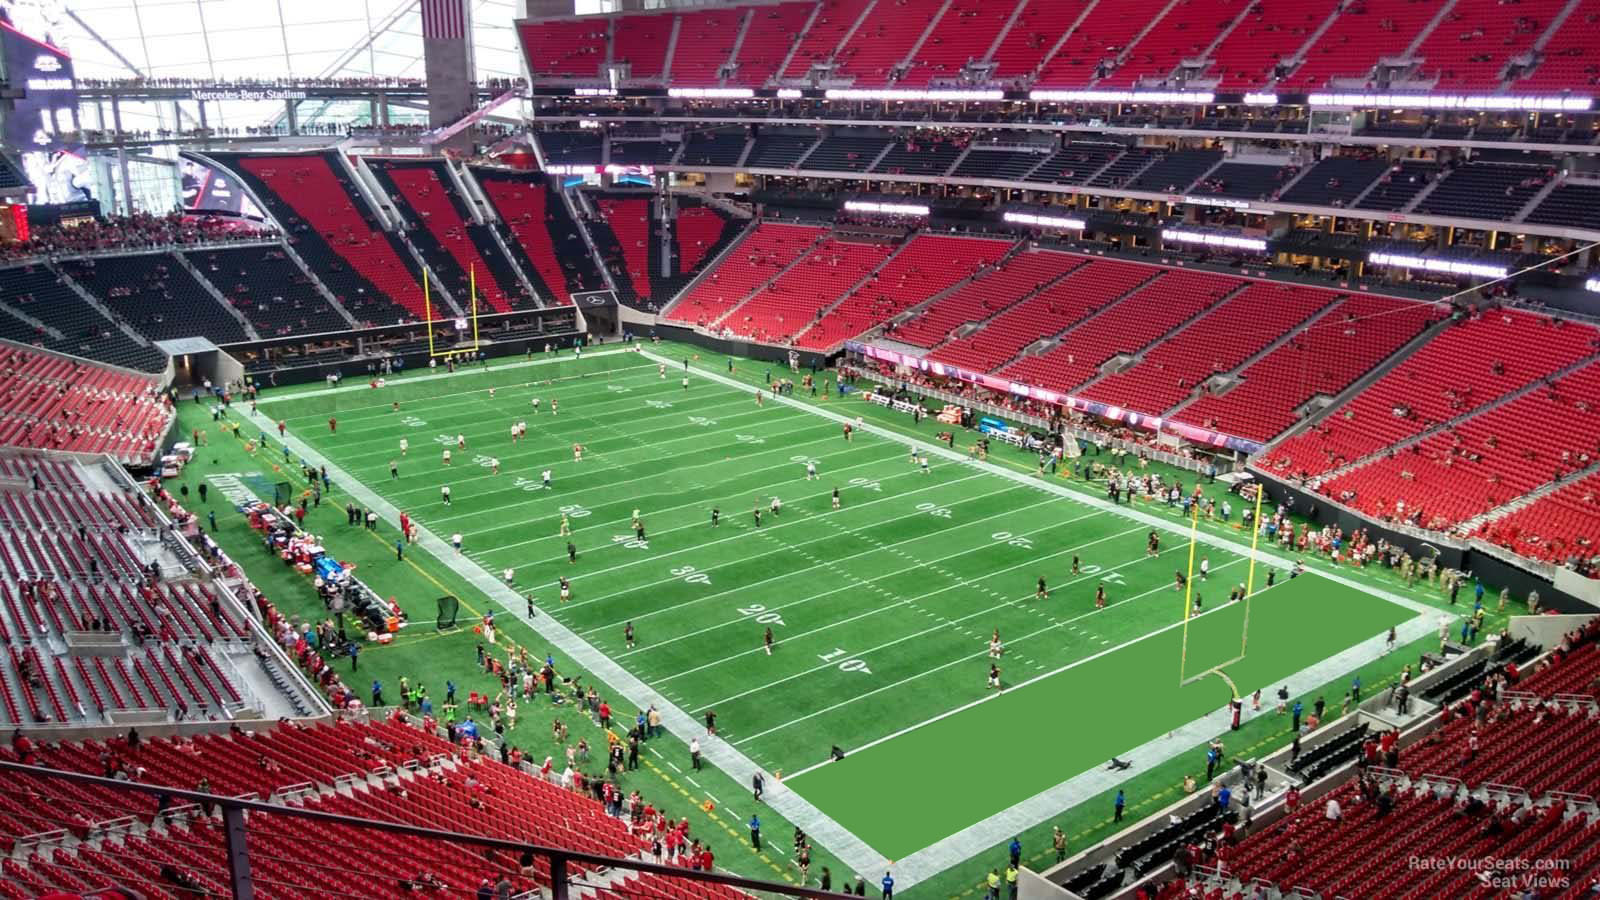 section 331, row 4 seat view  for football - mercedes-benz stadium